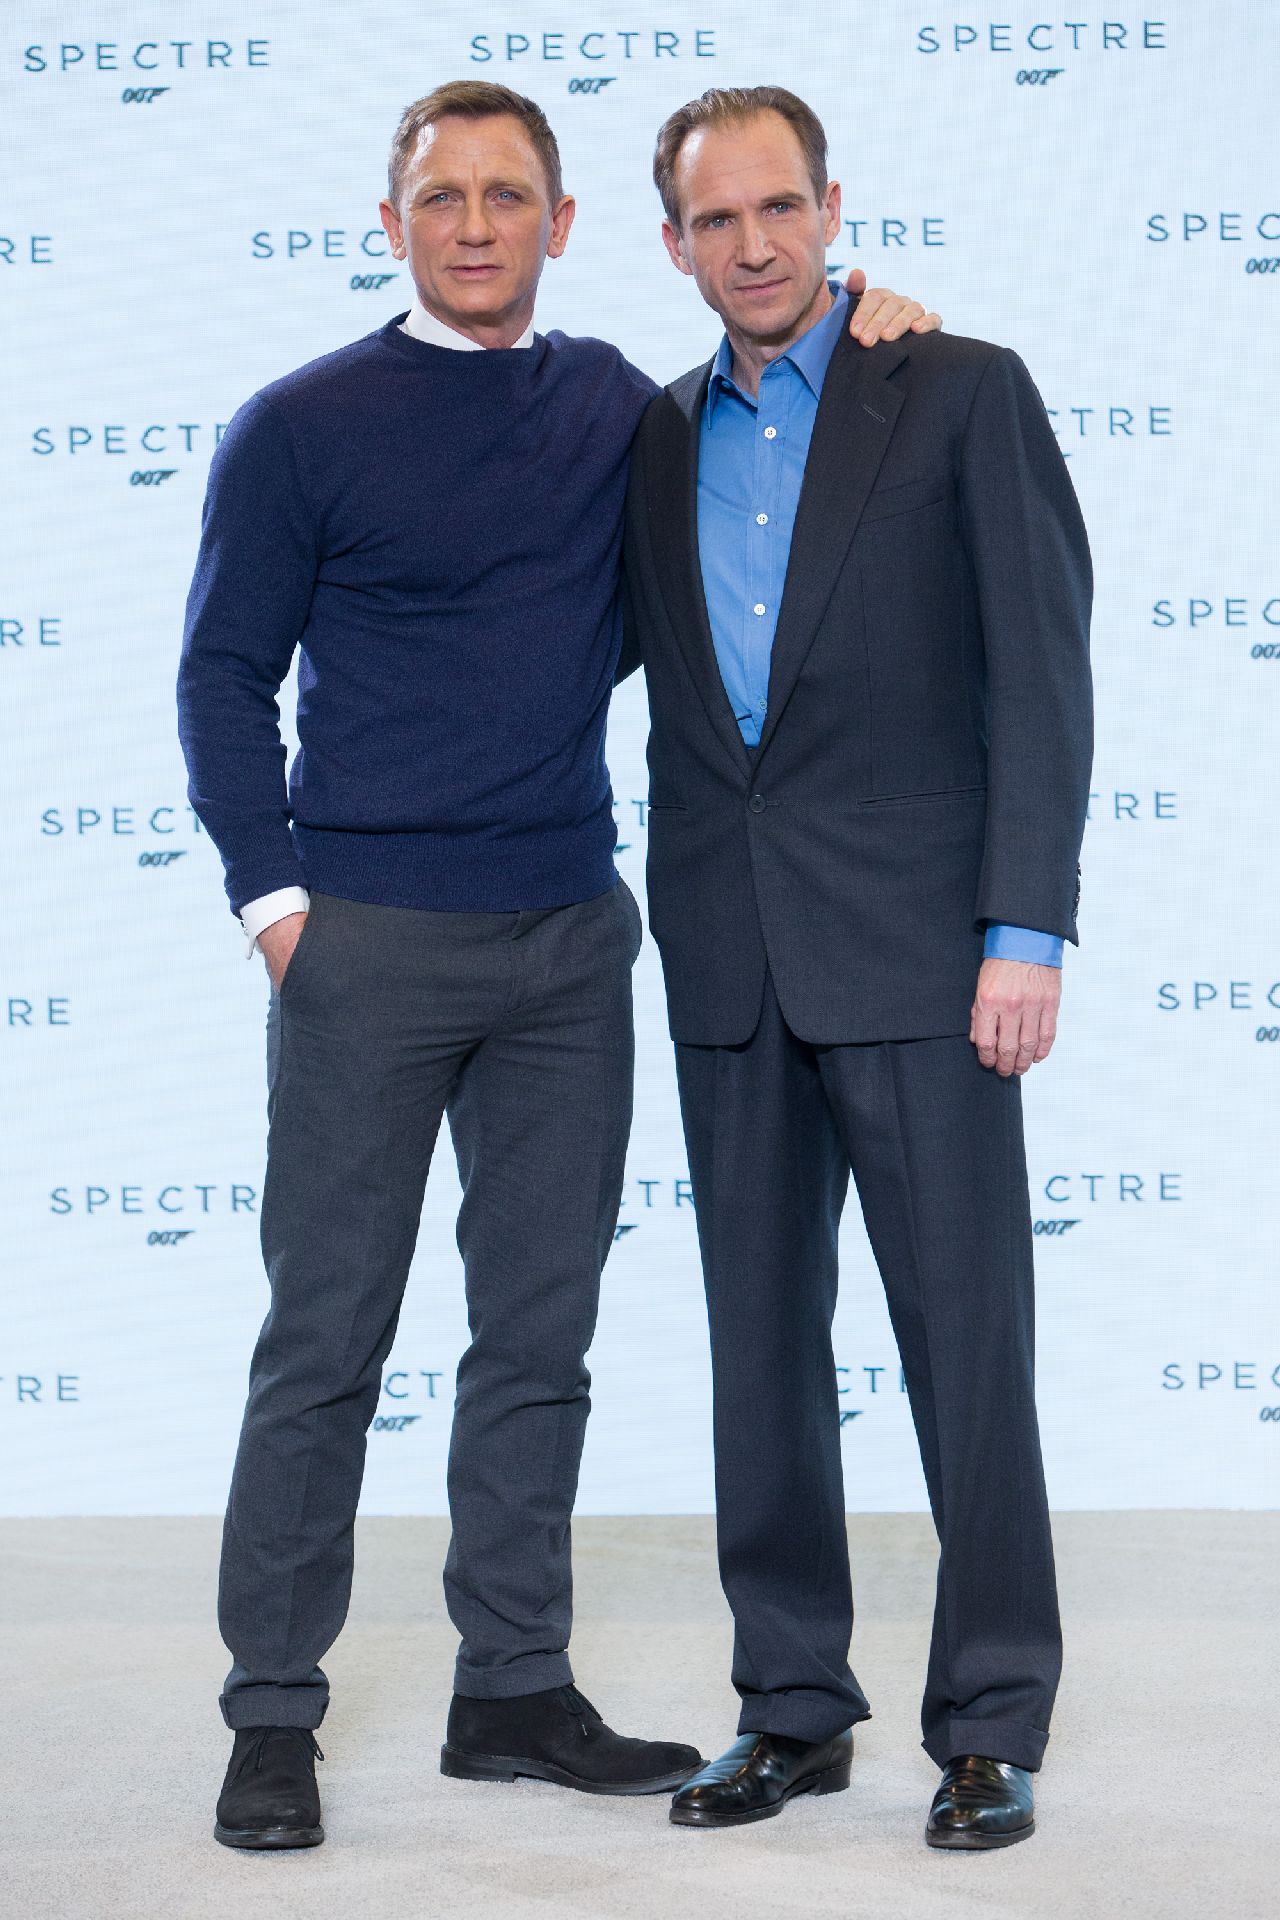 Check Out Over 40 Images from the Bond 24 Spectre Announcement! - Comic ...